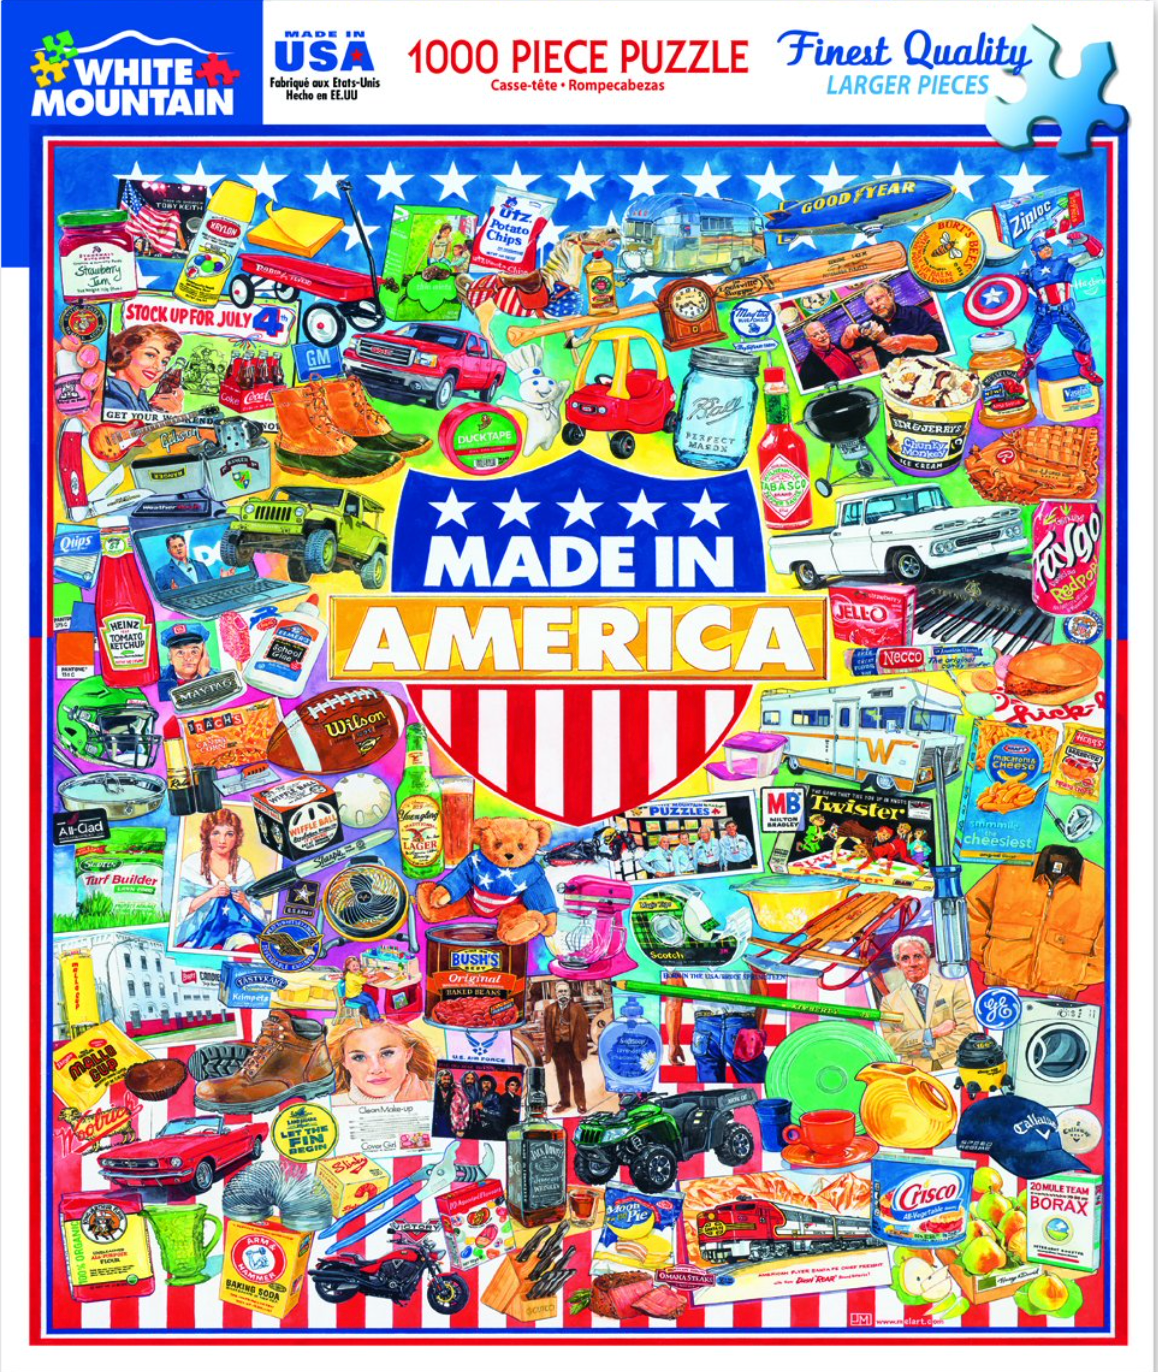 Made in America (1000 pc puzzle)